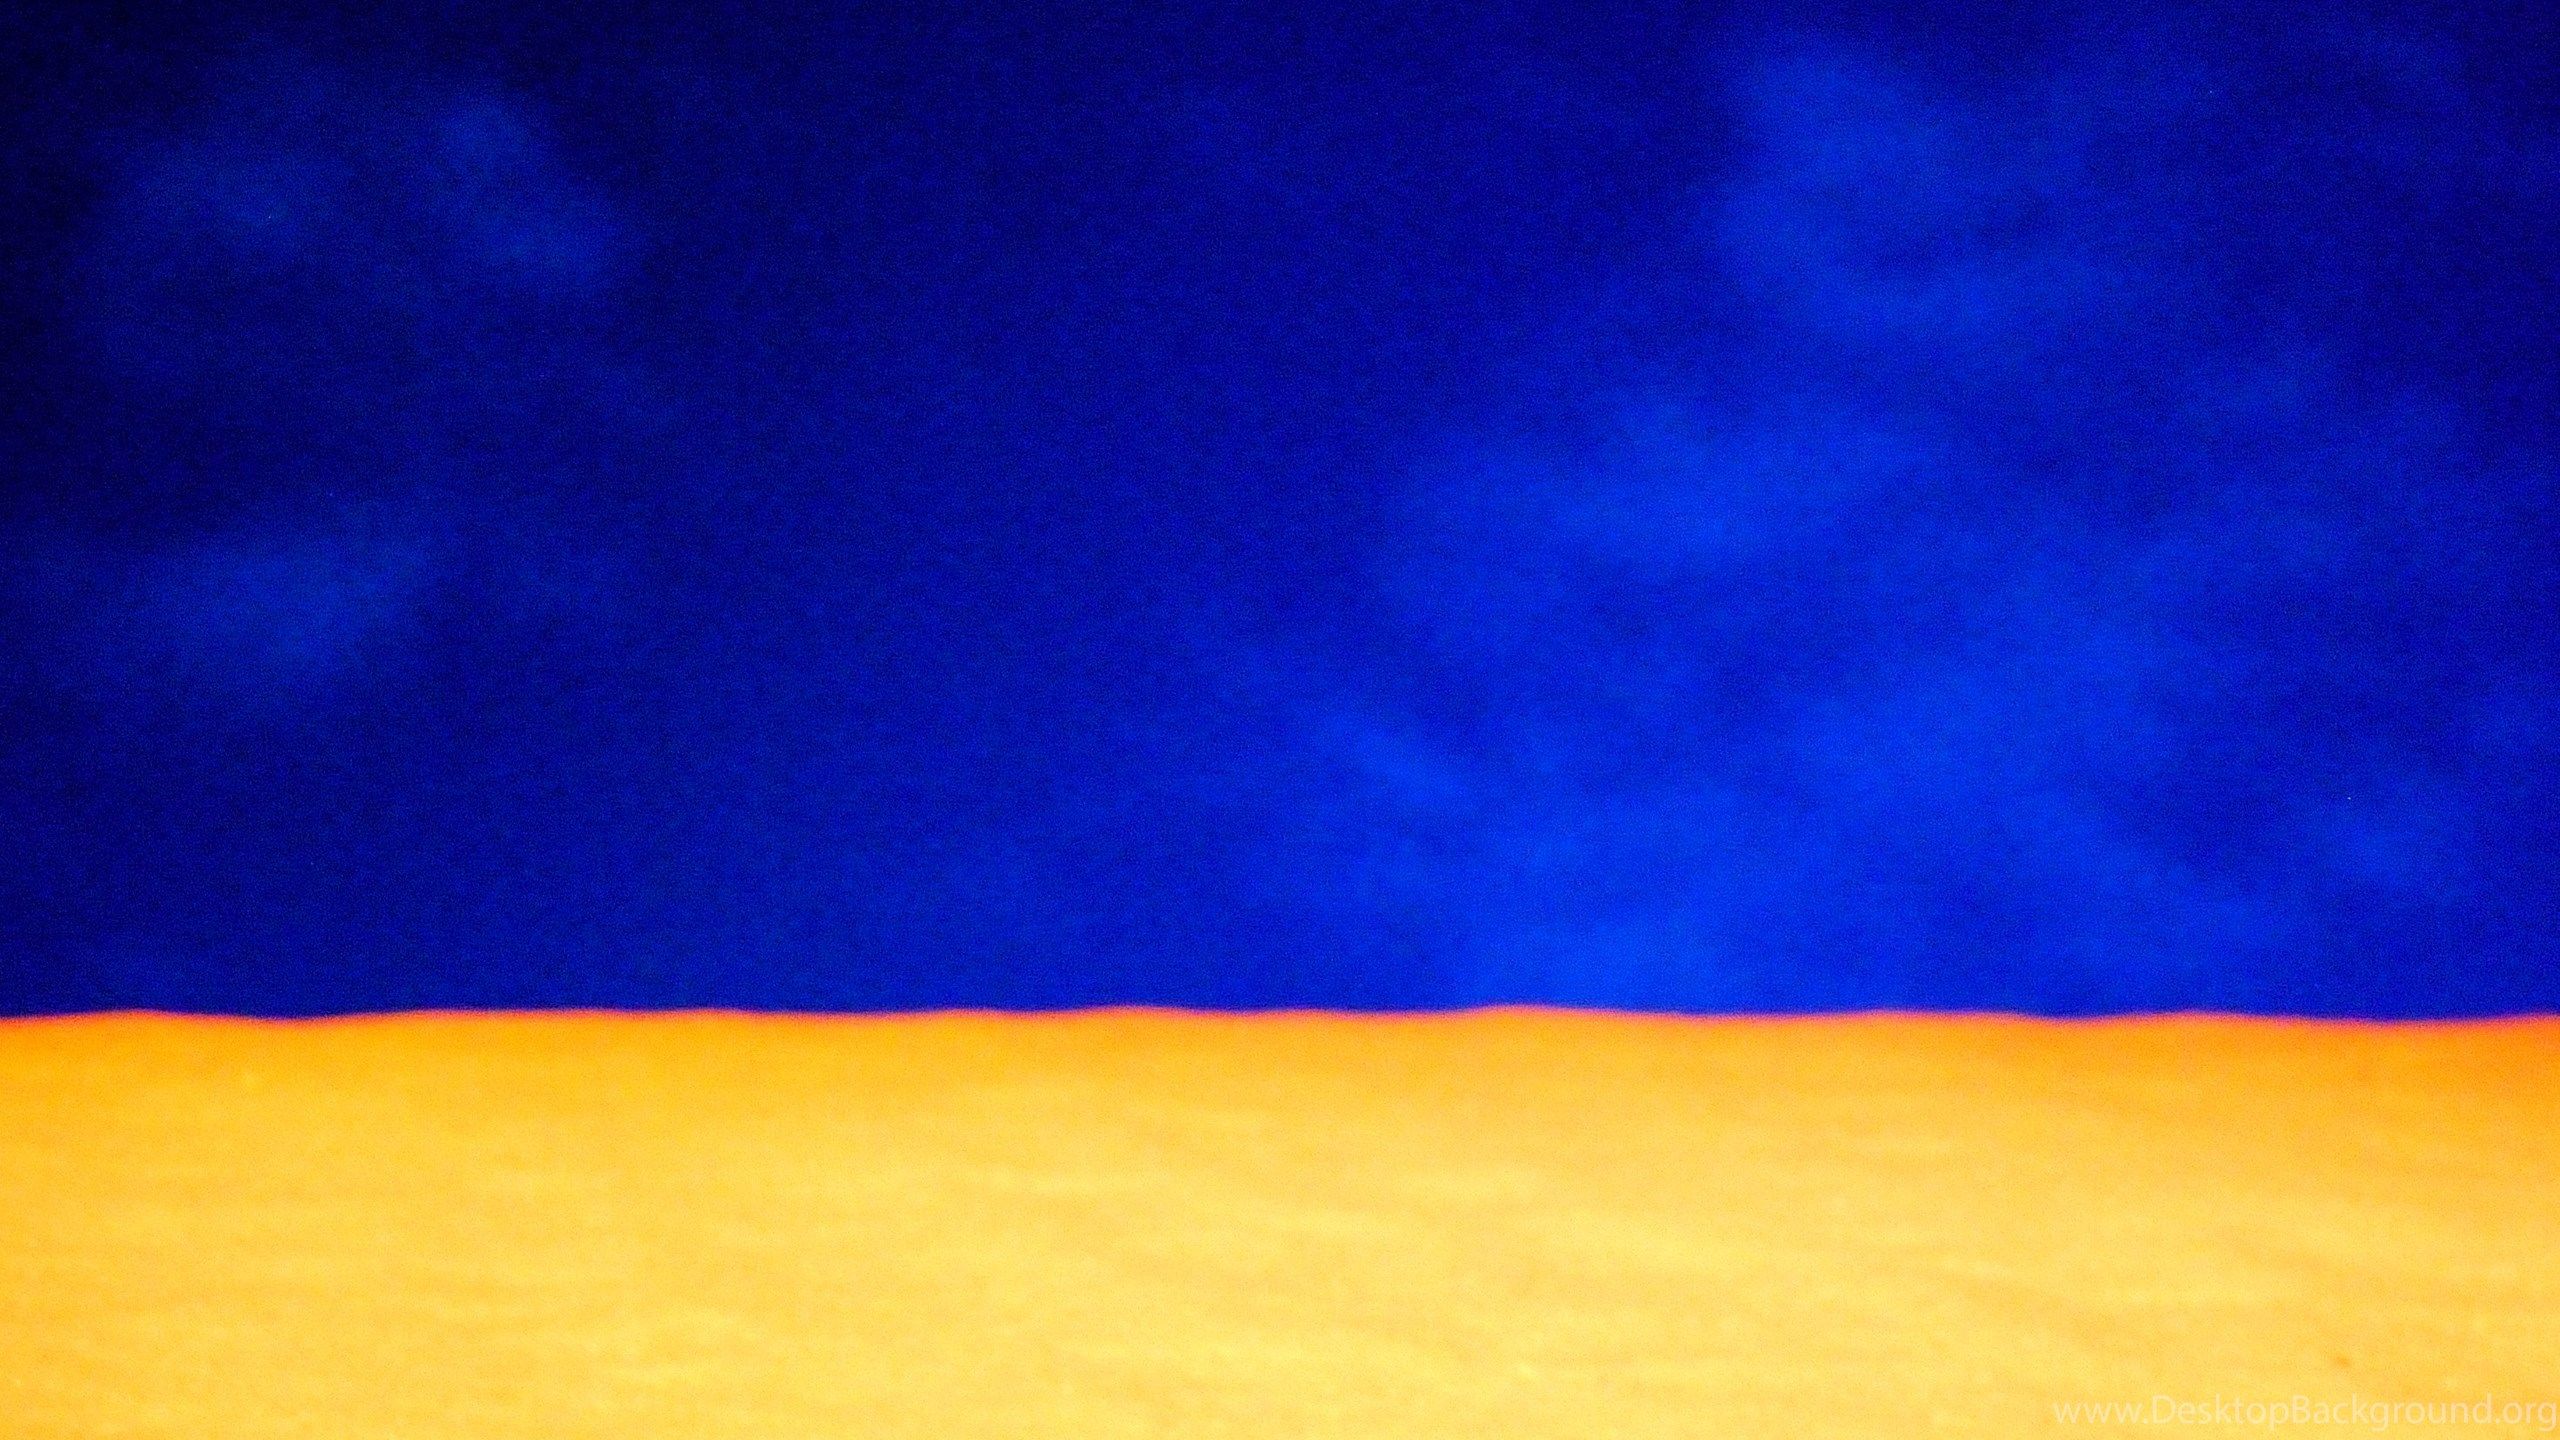 Abstract Wallpaper Abstract Blue And Yellow Wallpaper 35841. Desktop Background